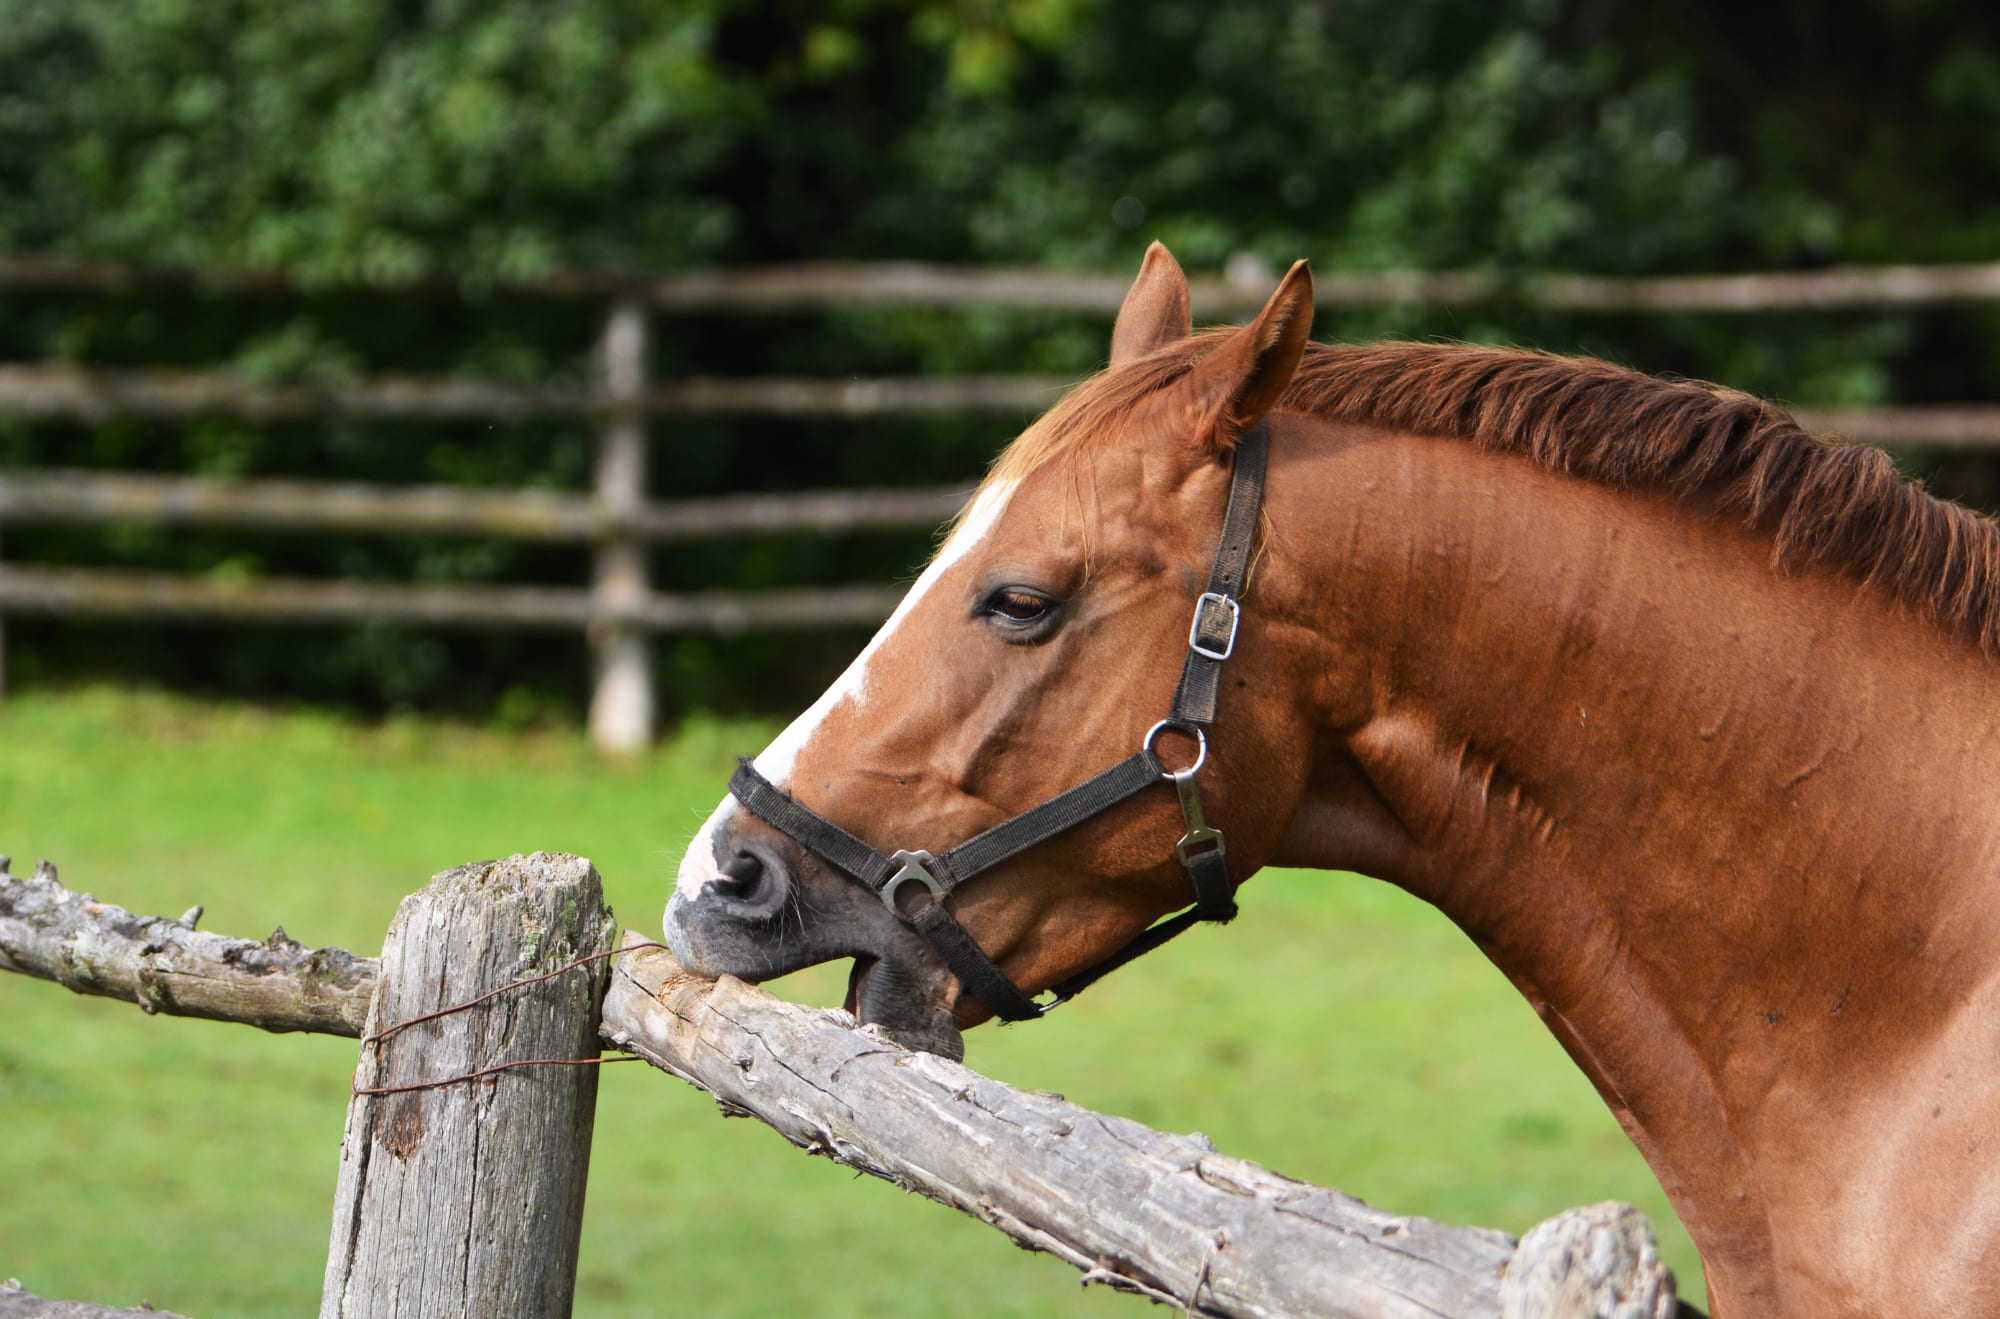 Although crib biting/windsucking is found in horses spending a lot of time stabled, they may exhibit these behaviours in other places.